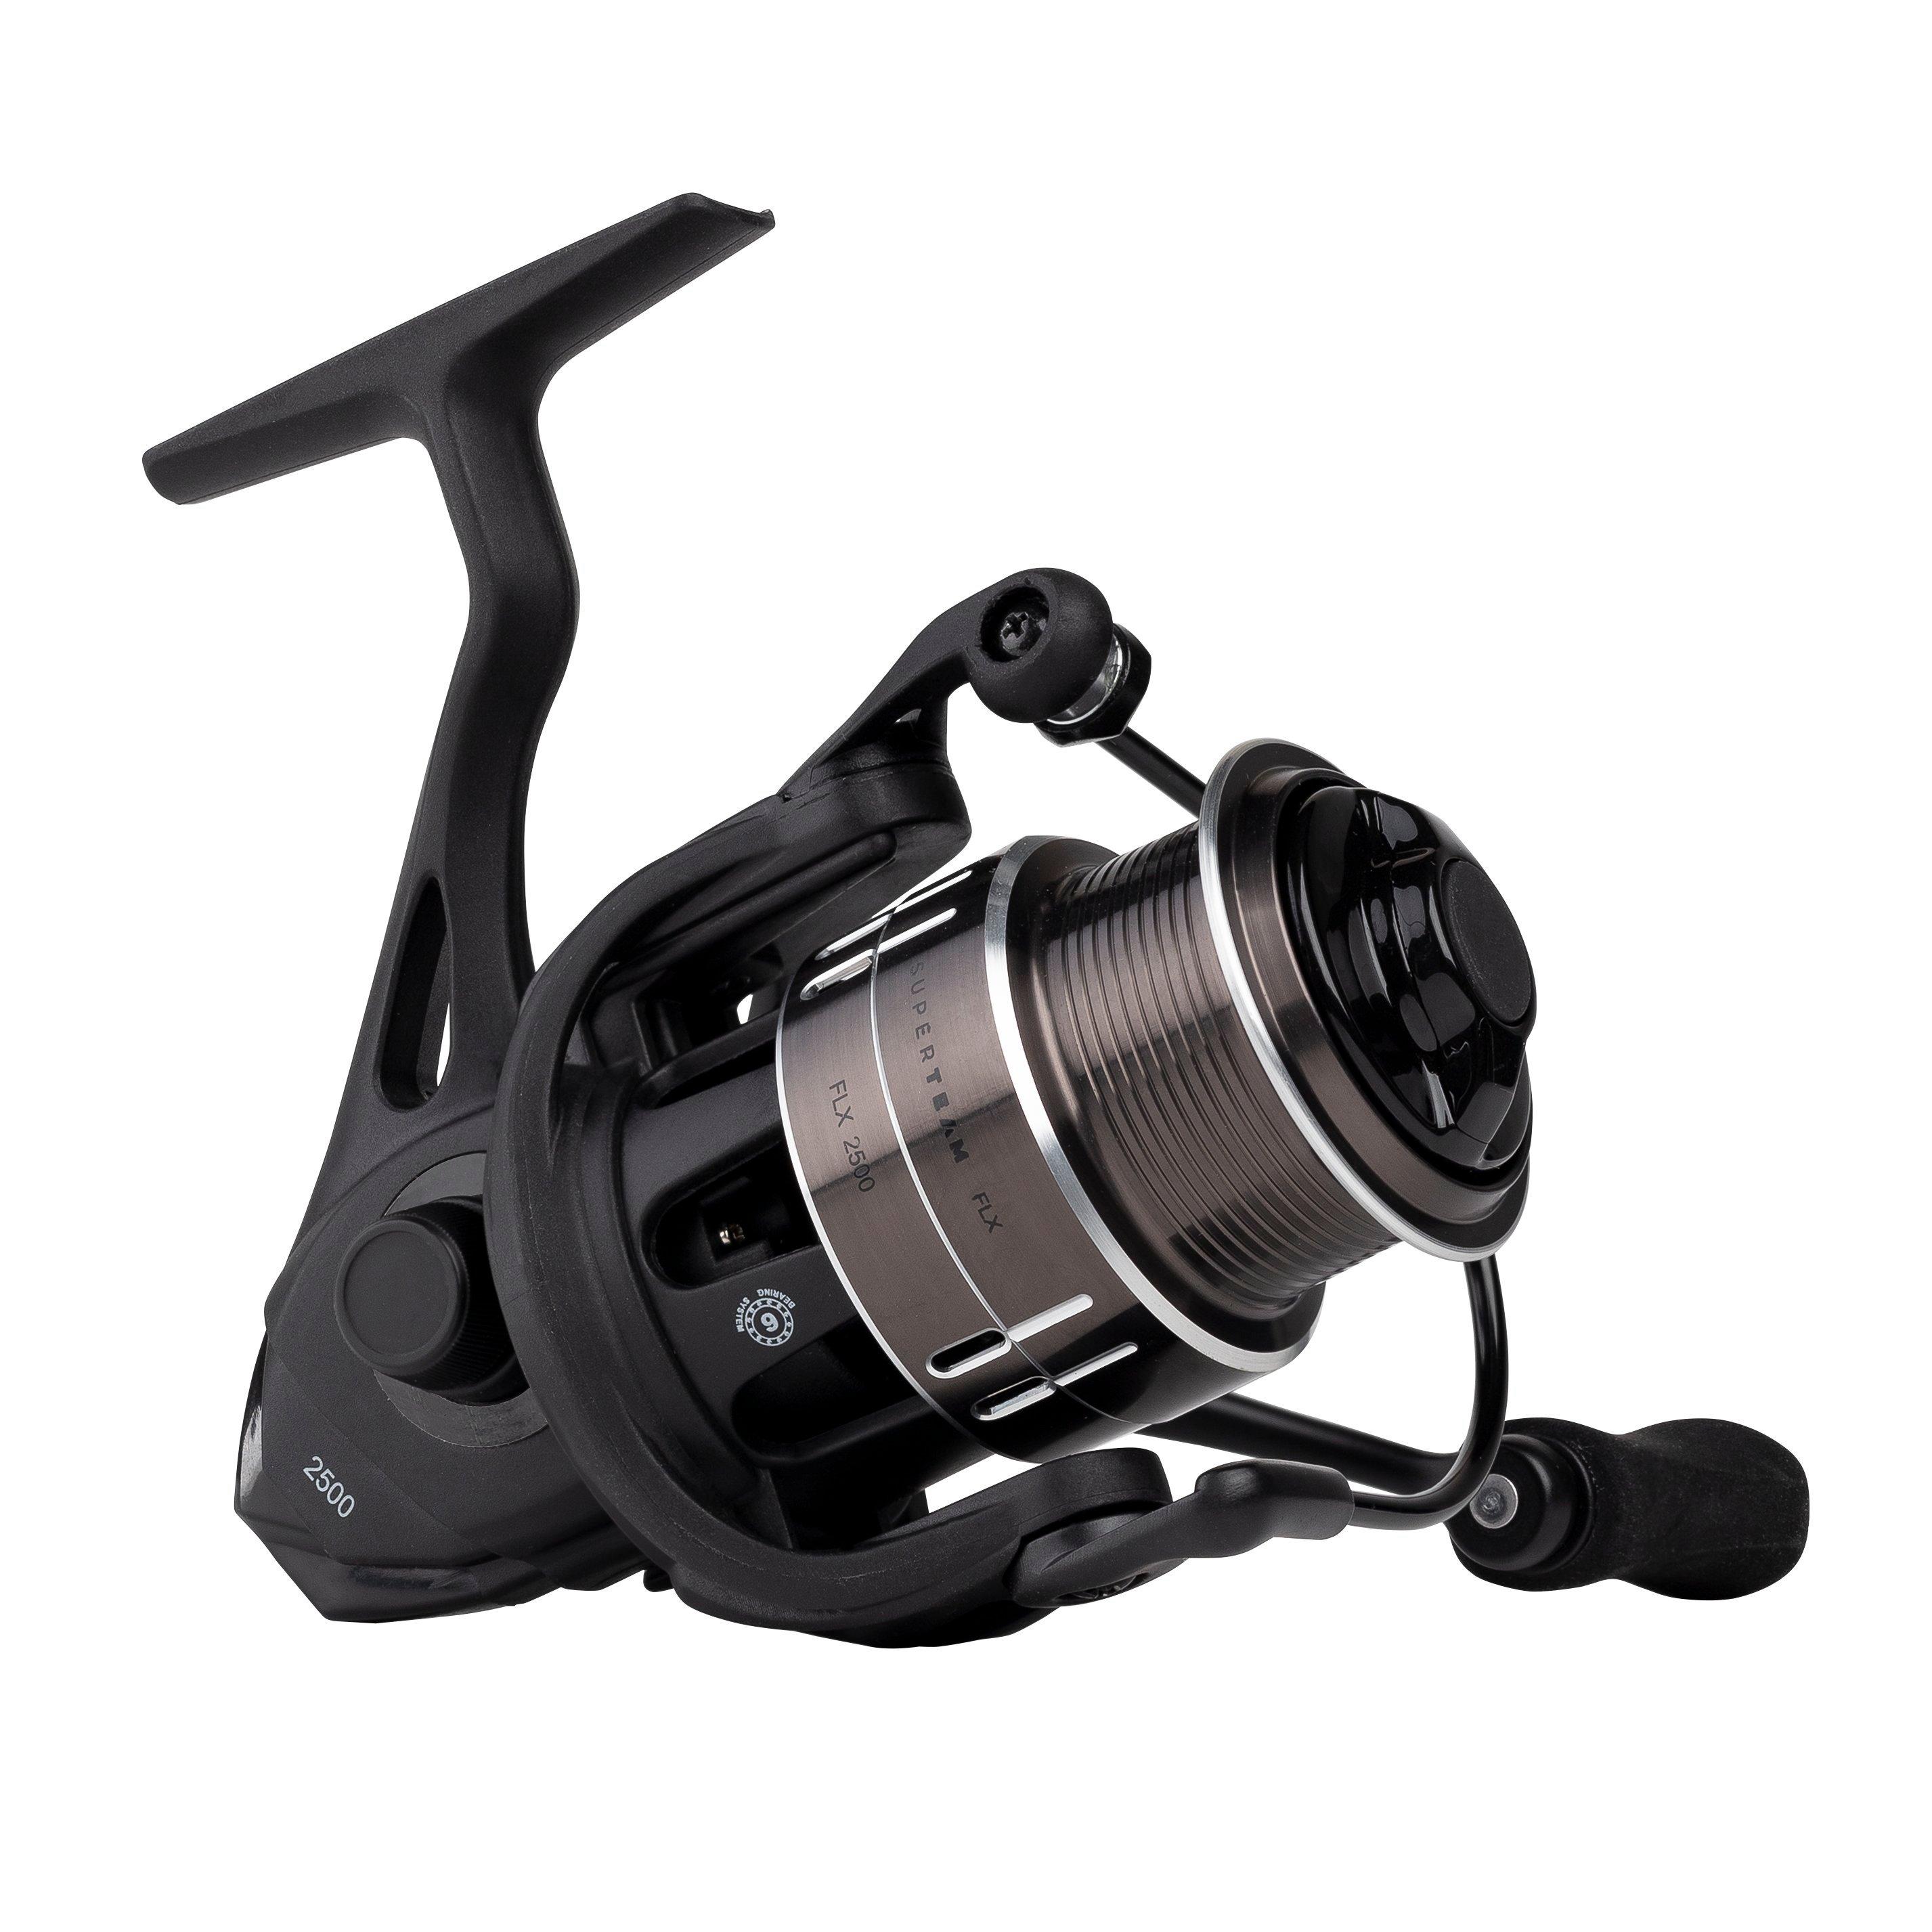 Fishing Shakespeare Dock Runner Spinning Reel USDR30 Crappie Bream Trout